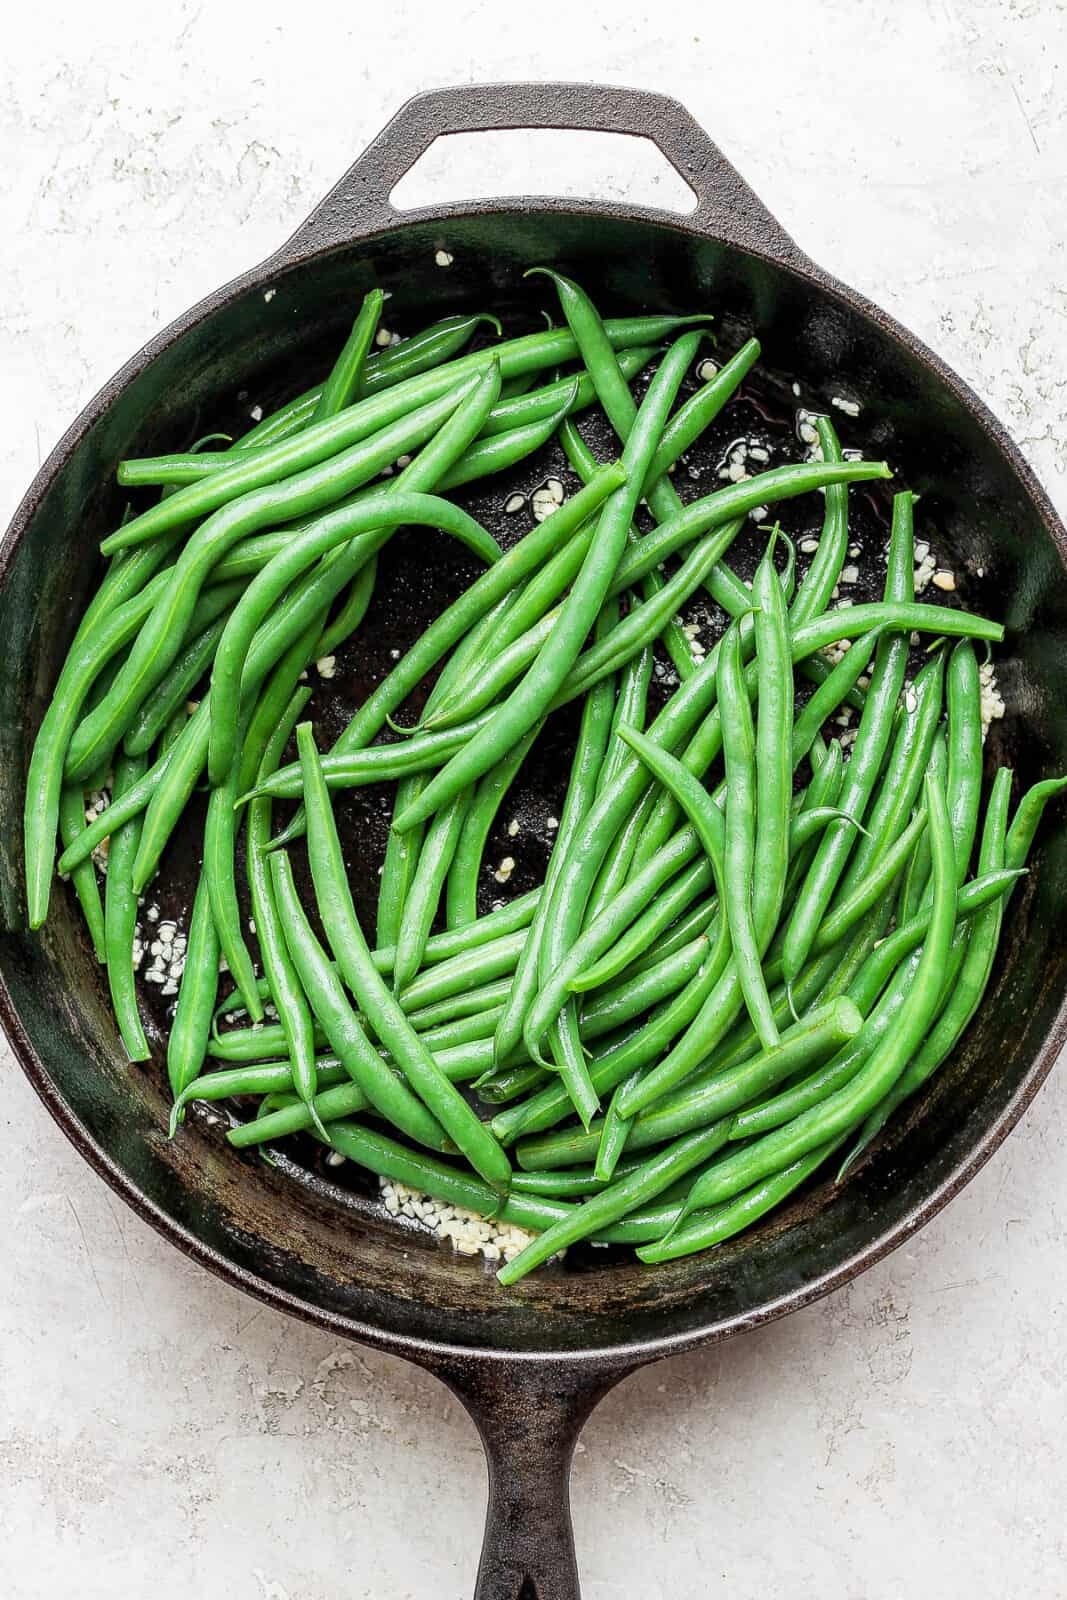 Blanched green beans in a cast iron skillet.